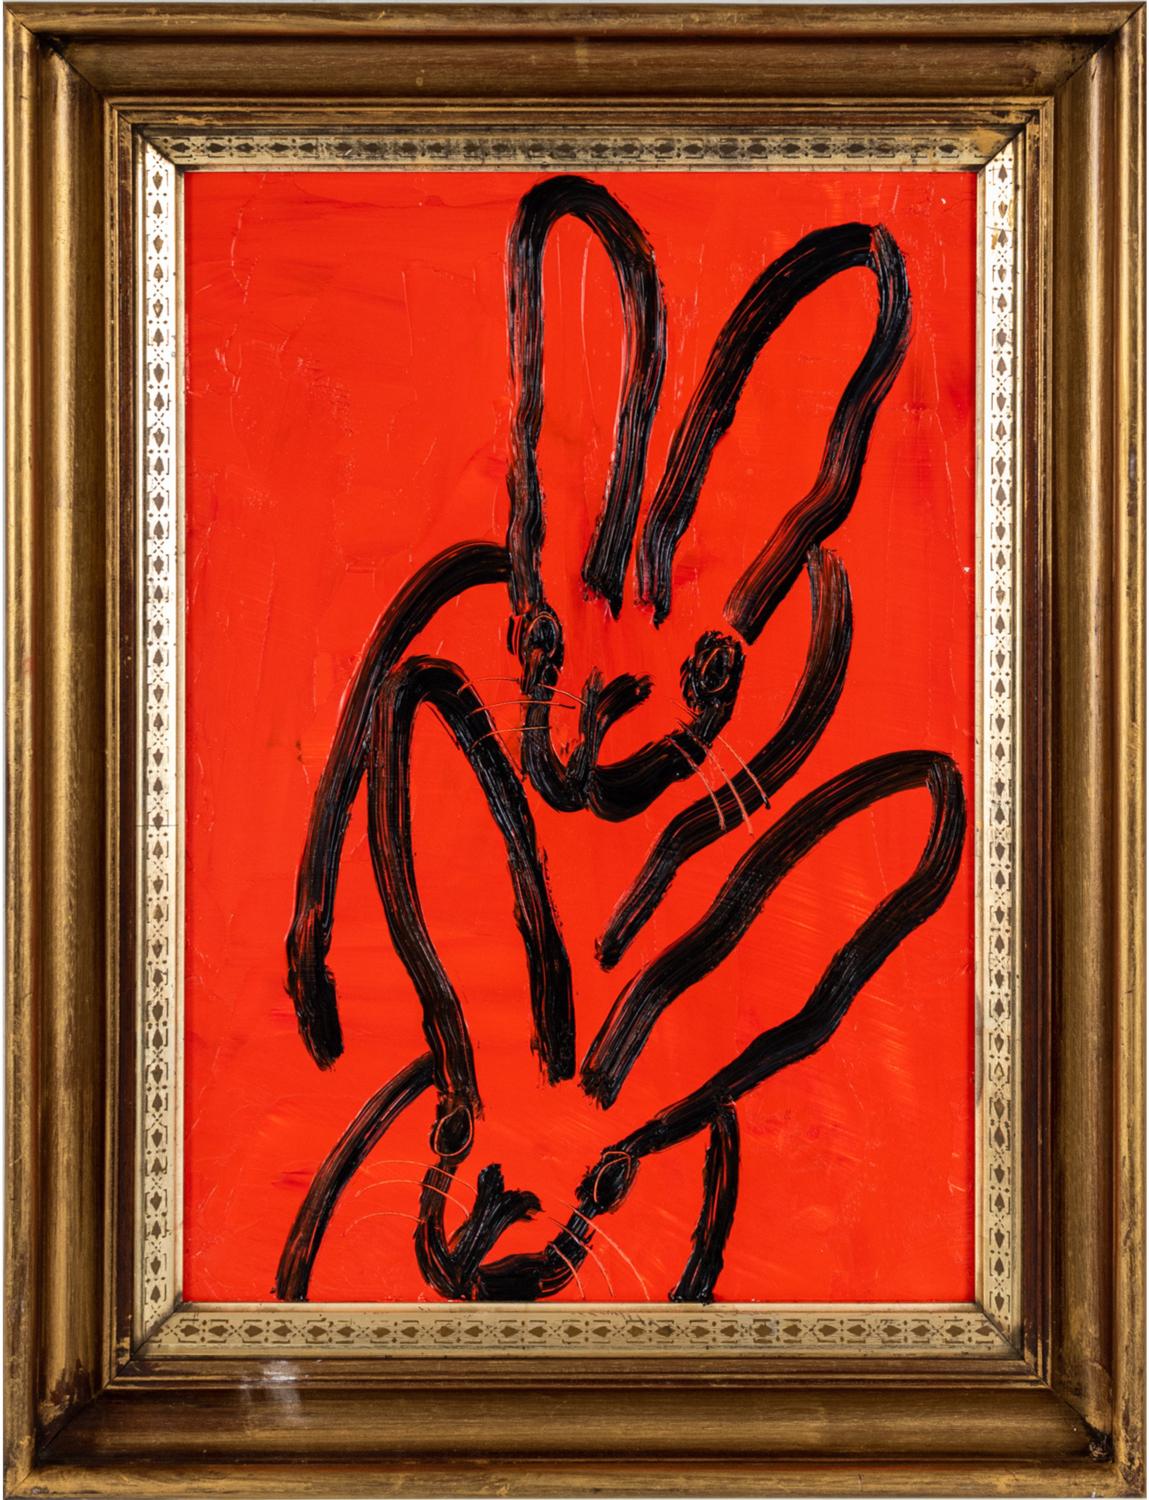 Renowned artist Hunt Slonem's "Tumble Hutch" is a 20.5 x14.5 fire red oil painting on wood board of contemporary abstract bunnies in black. 

*Painting is framed - Please note that not all Hunt Slonem frames are in mint condition. There may be signs